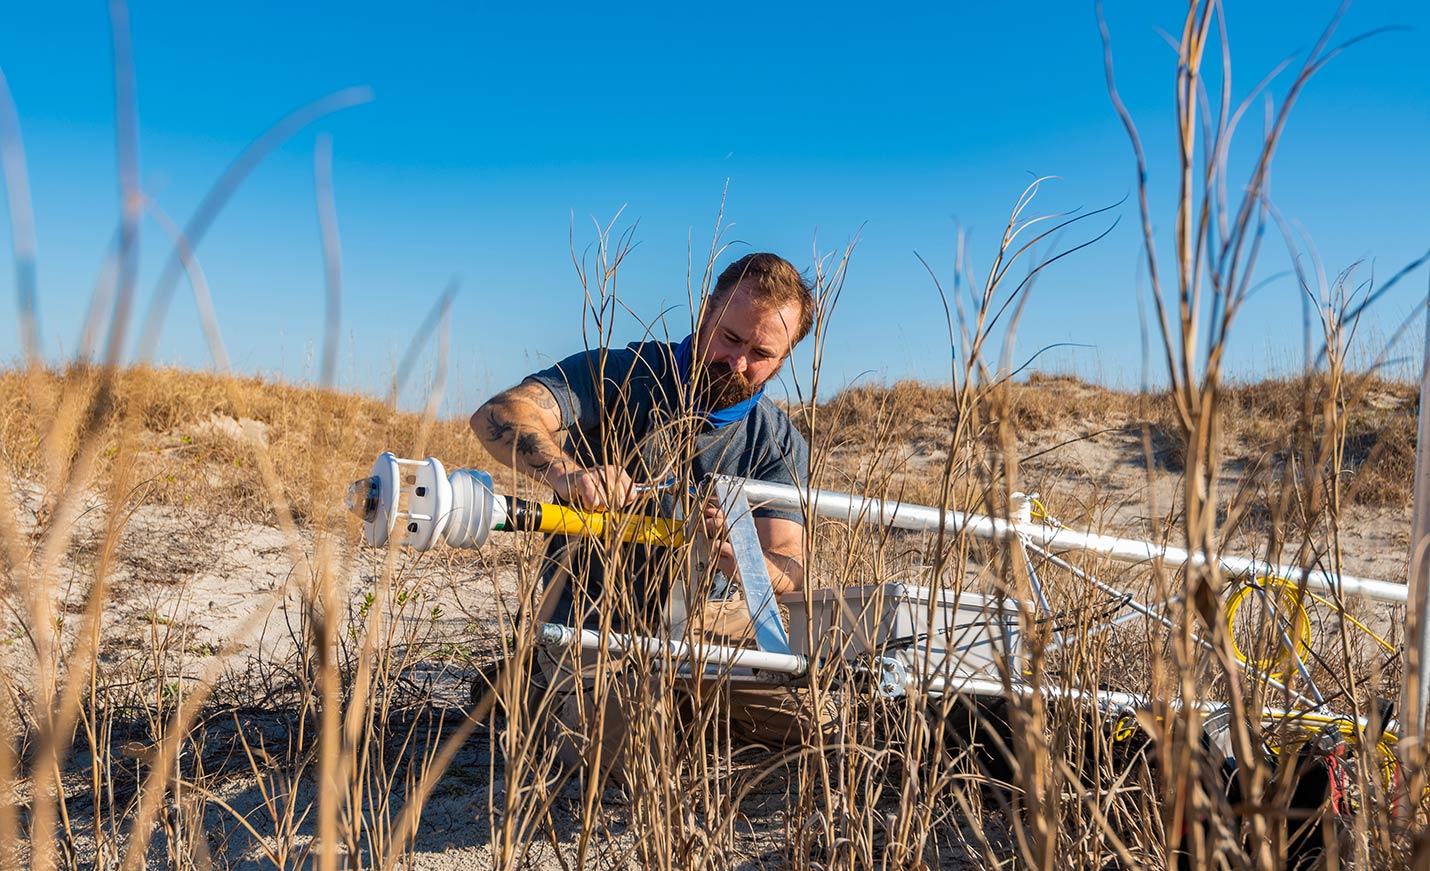 faculty member adjusting a weather measurement tool at the beach